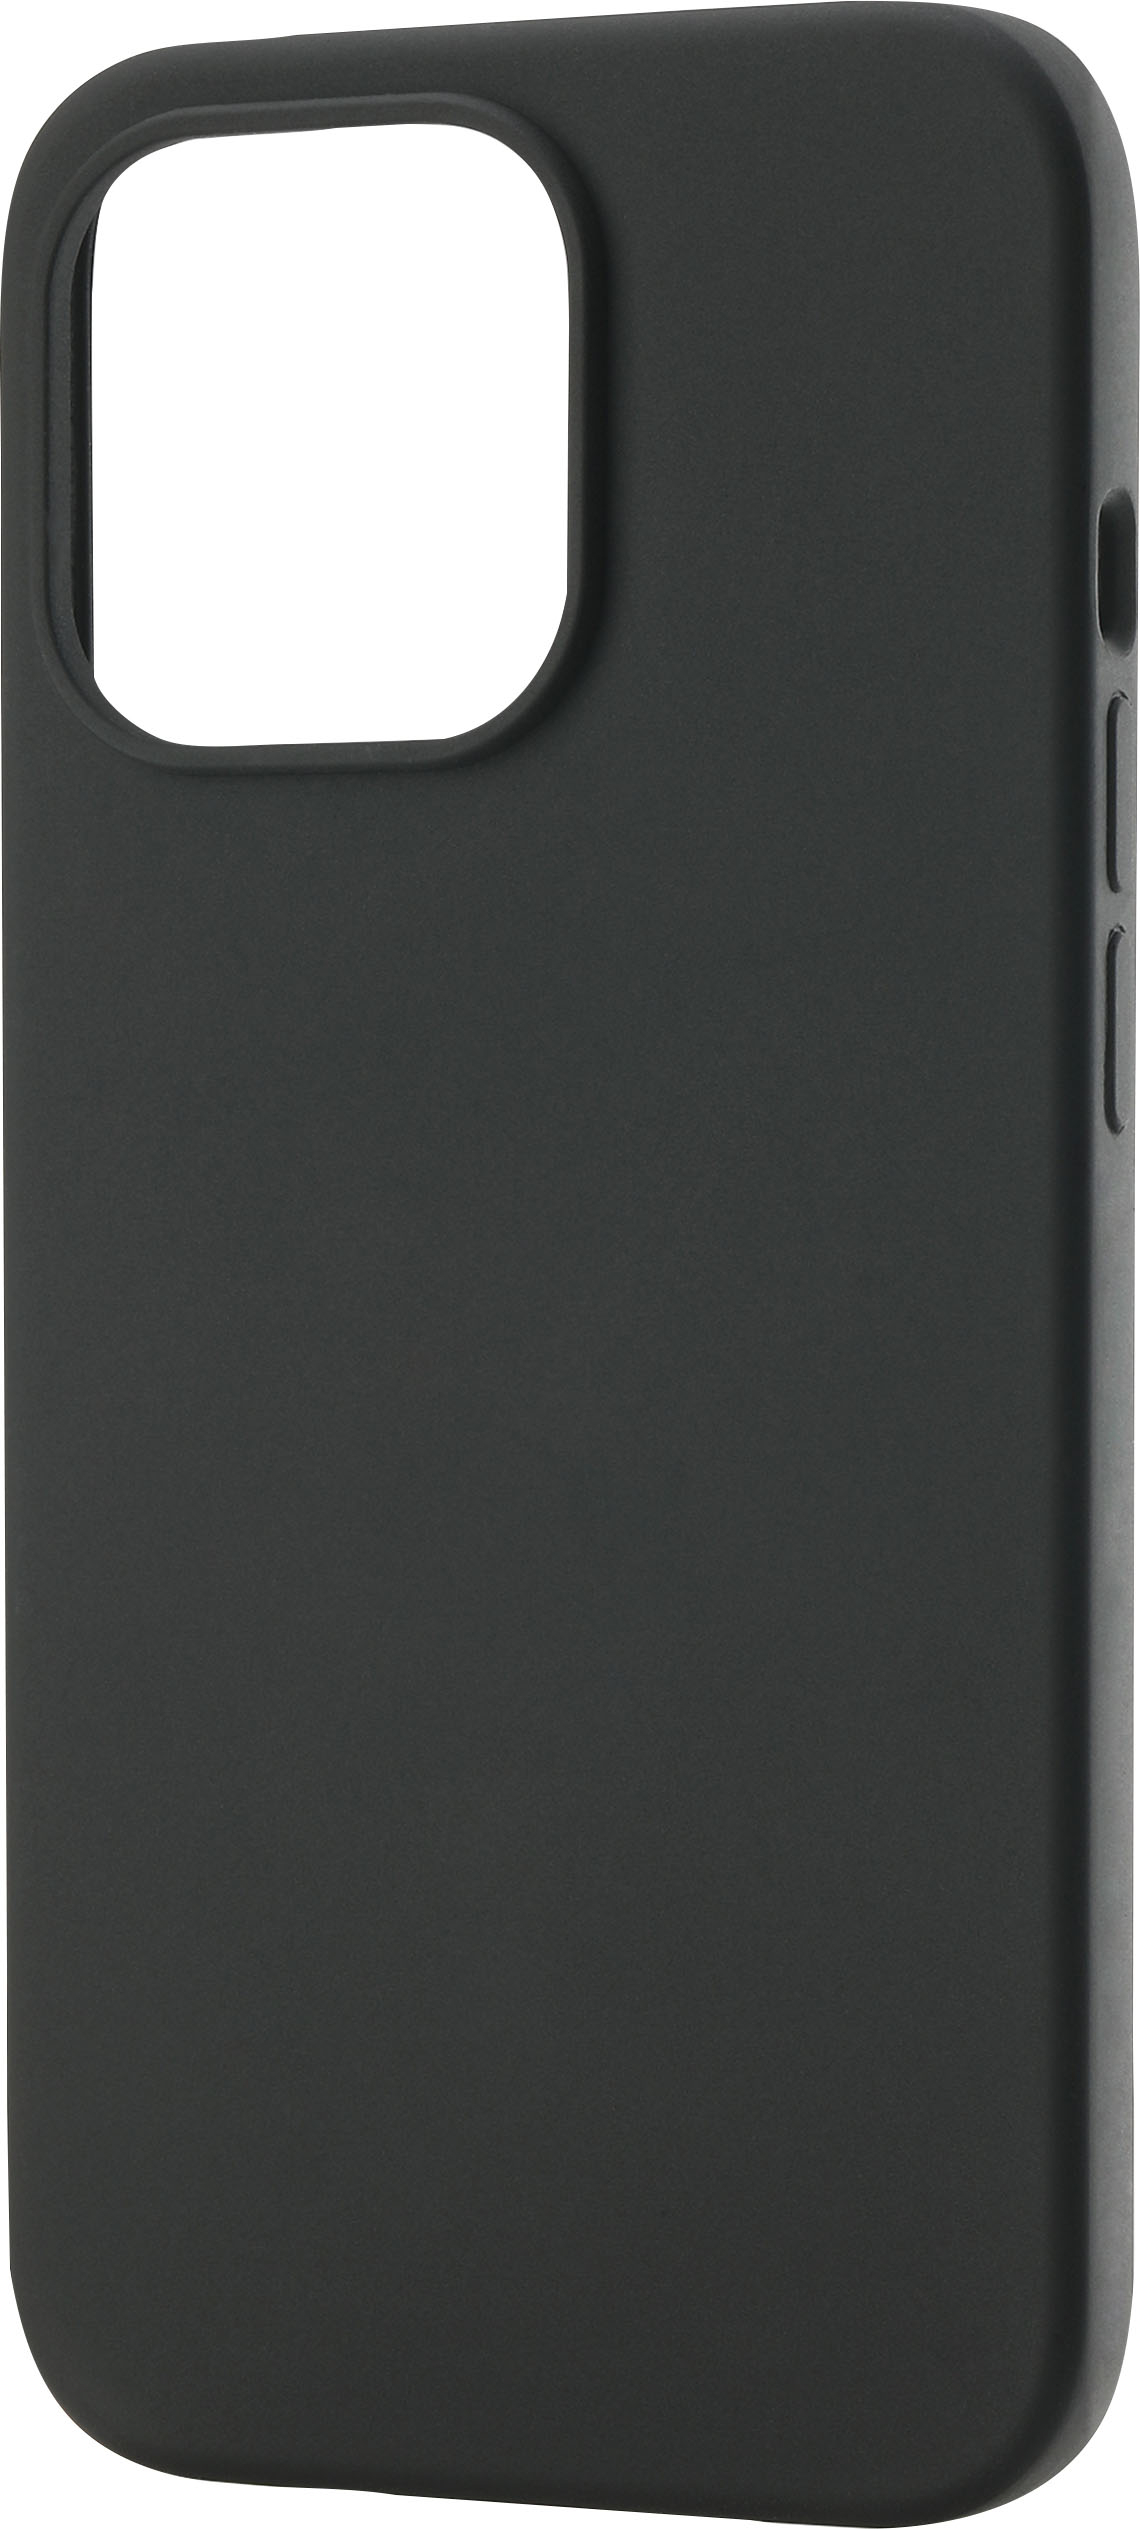 Customer Reviews: Best Buy essentials™ Liquid Silicone Case with ...